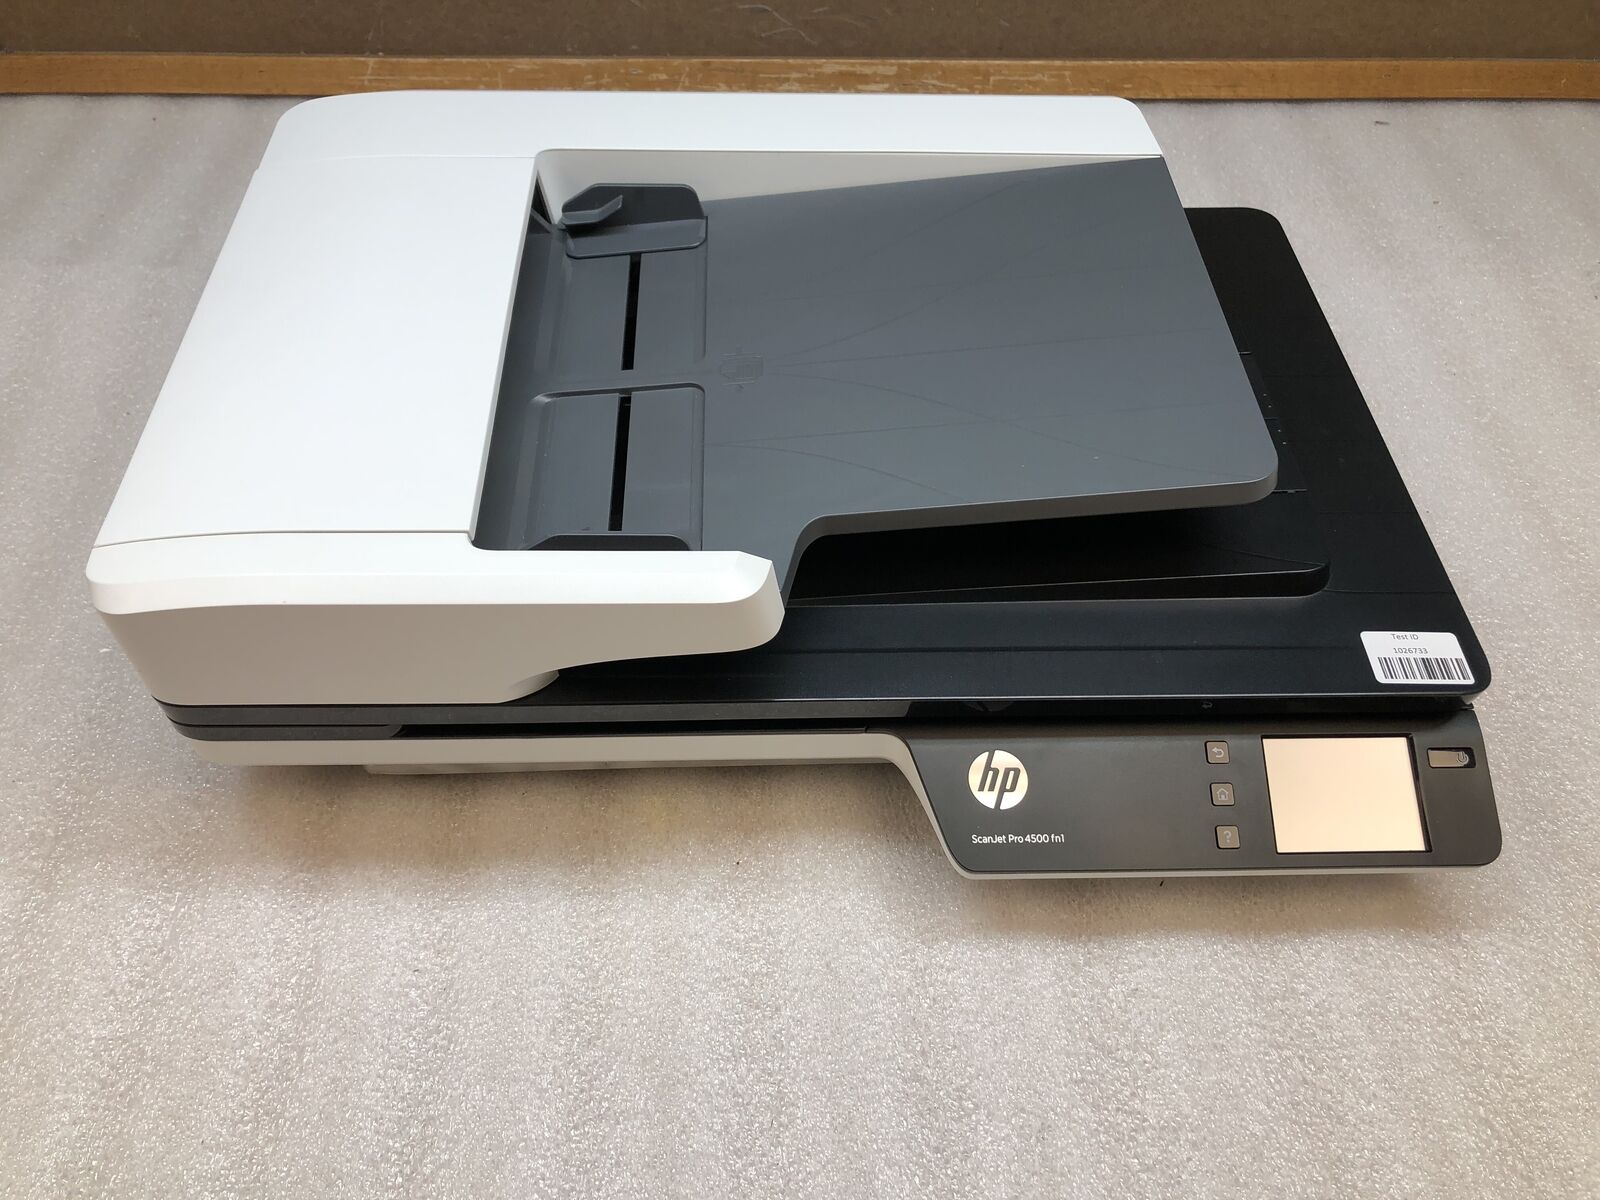 HP ScanJet Pro 4500 fn1 L2749A SHNGD-1401-01 Network Scanner TESTED and RESET